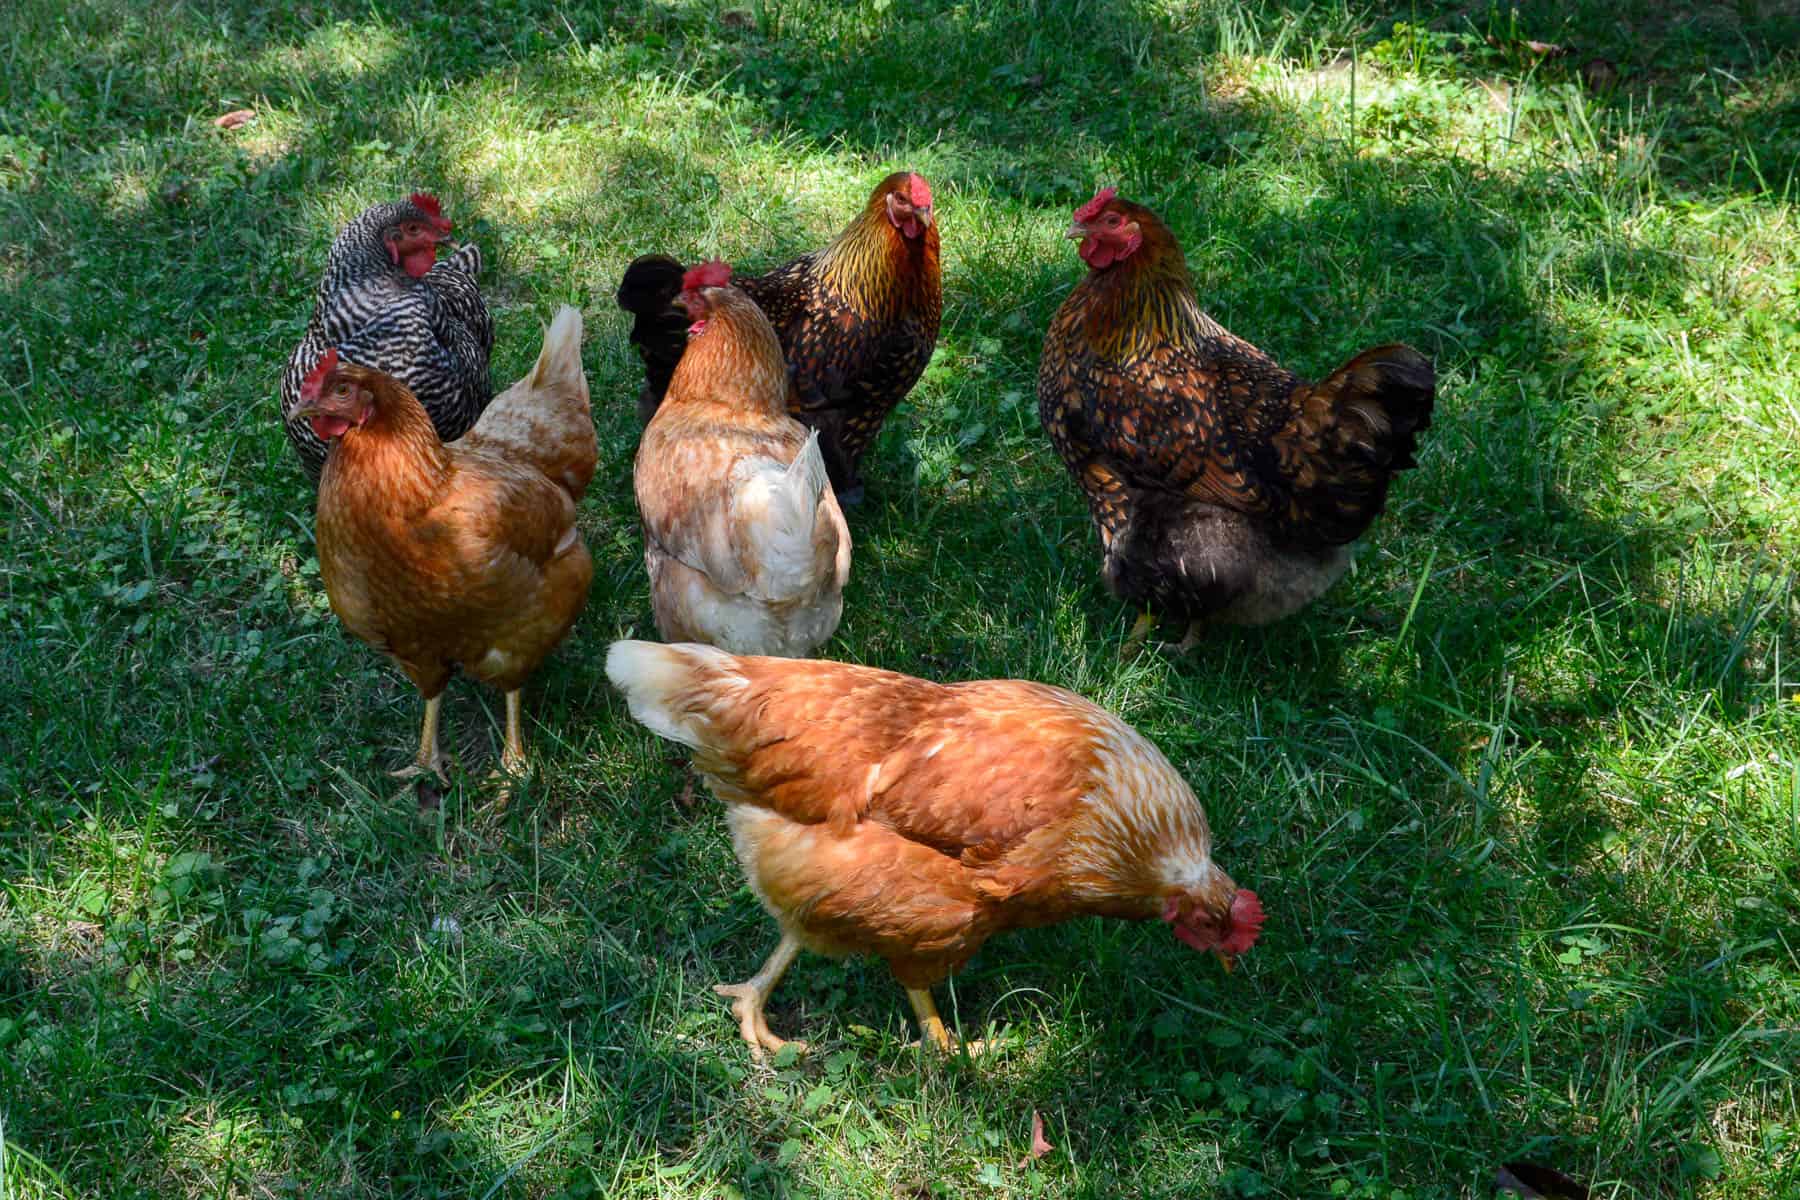 Several chickens from our flock free ranging.